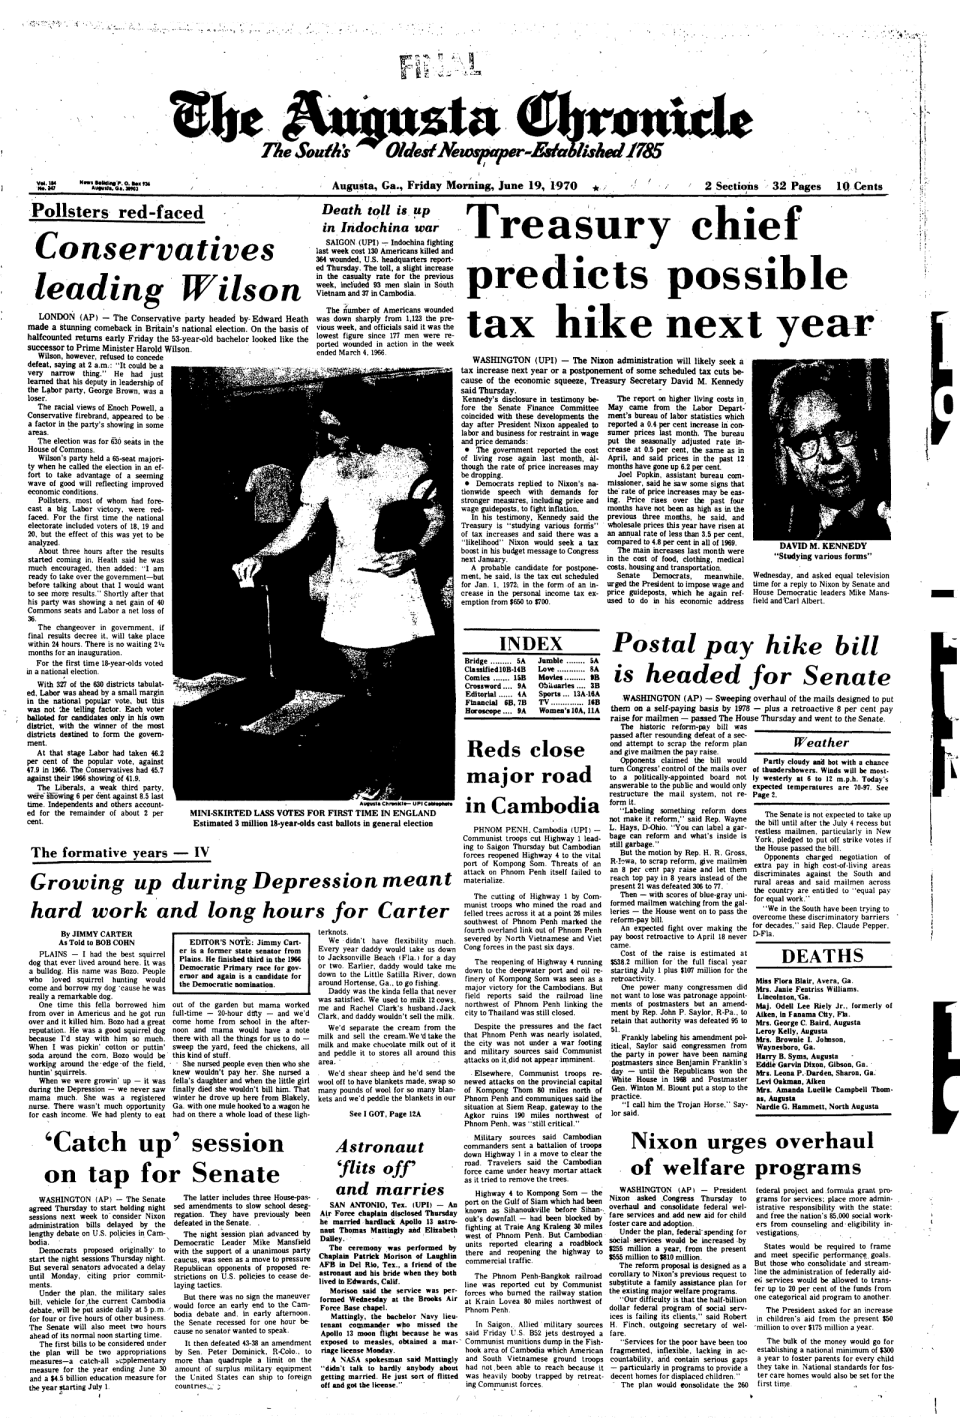 The front page of the Augusta Chronicle on June 19, 1970, when Jimmy Carter told the story of growing up during the Great Depressions in Plains, GA.